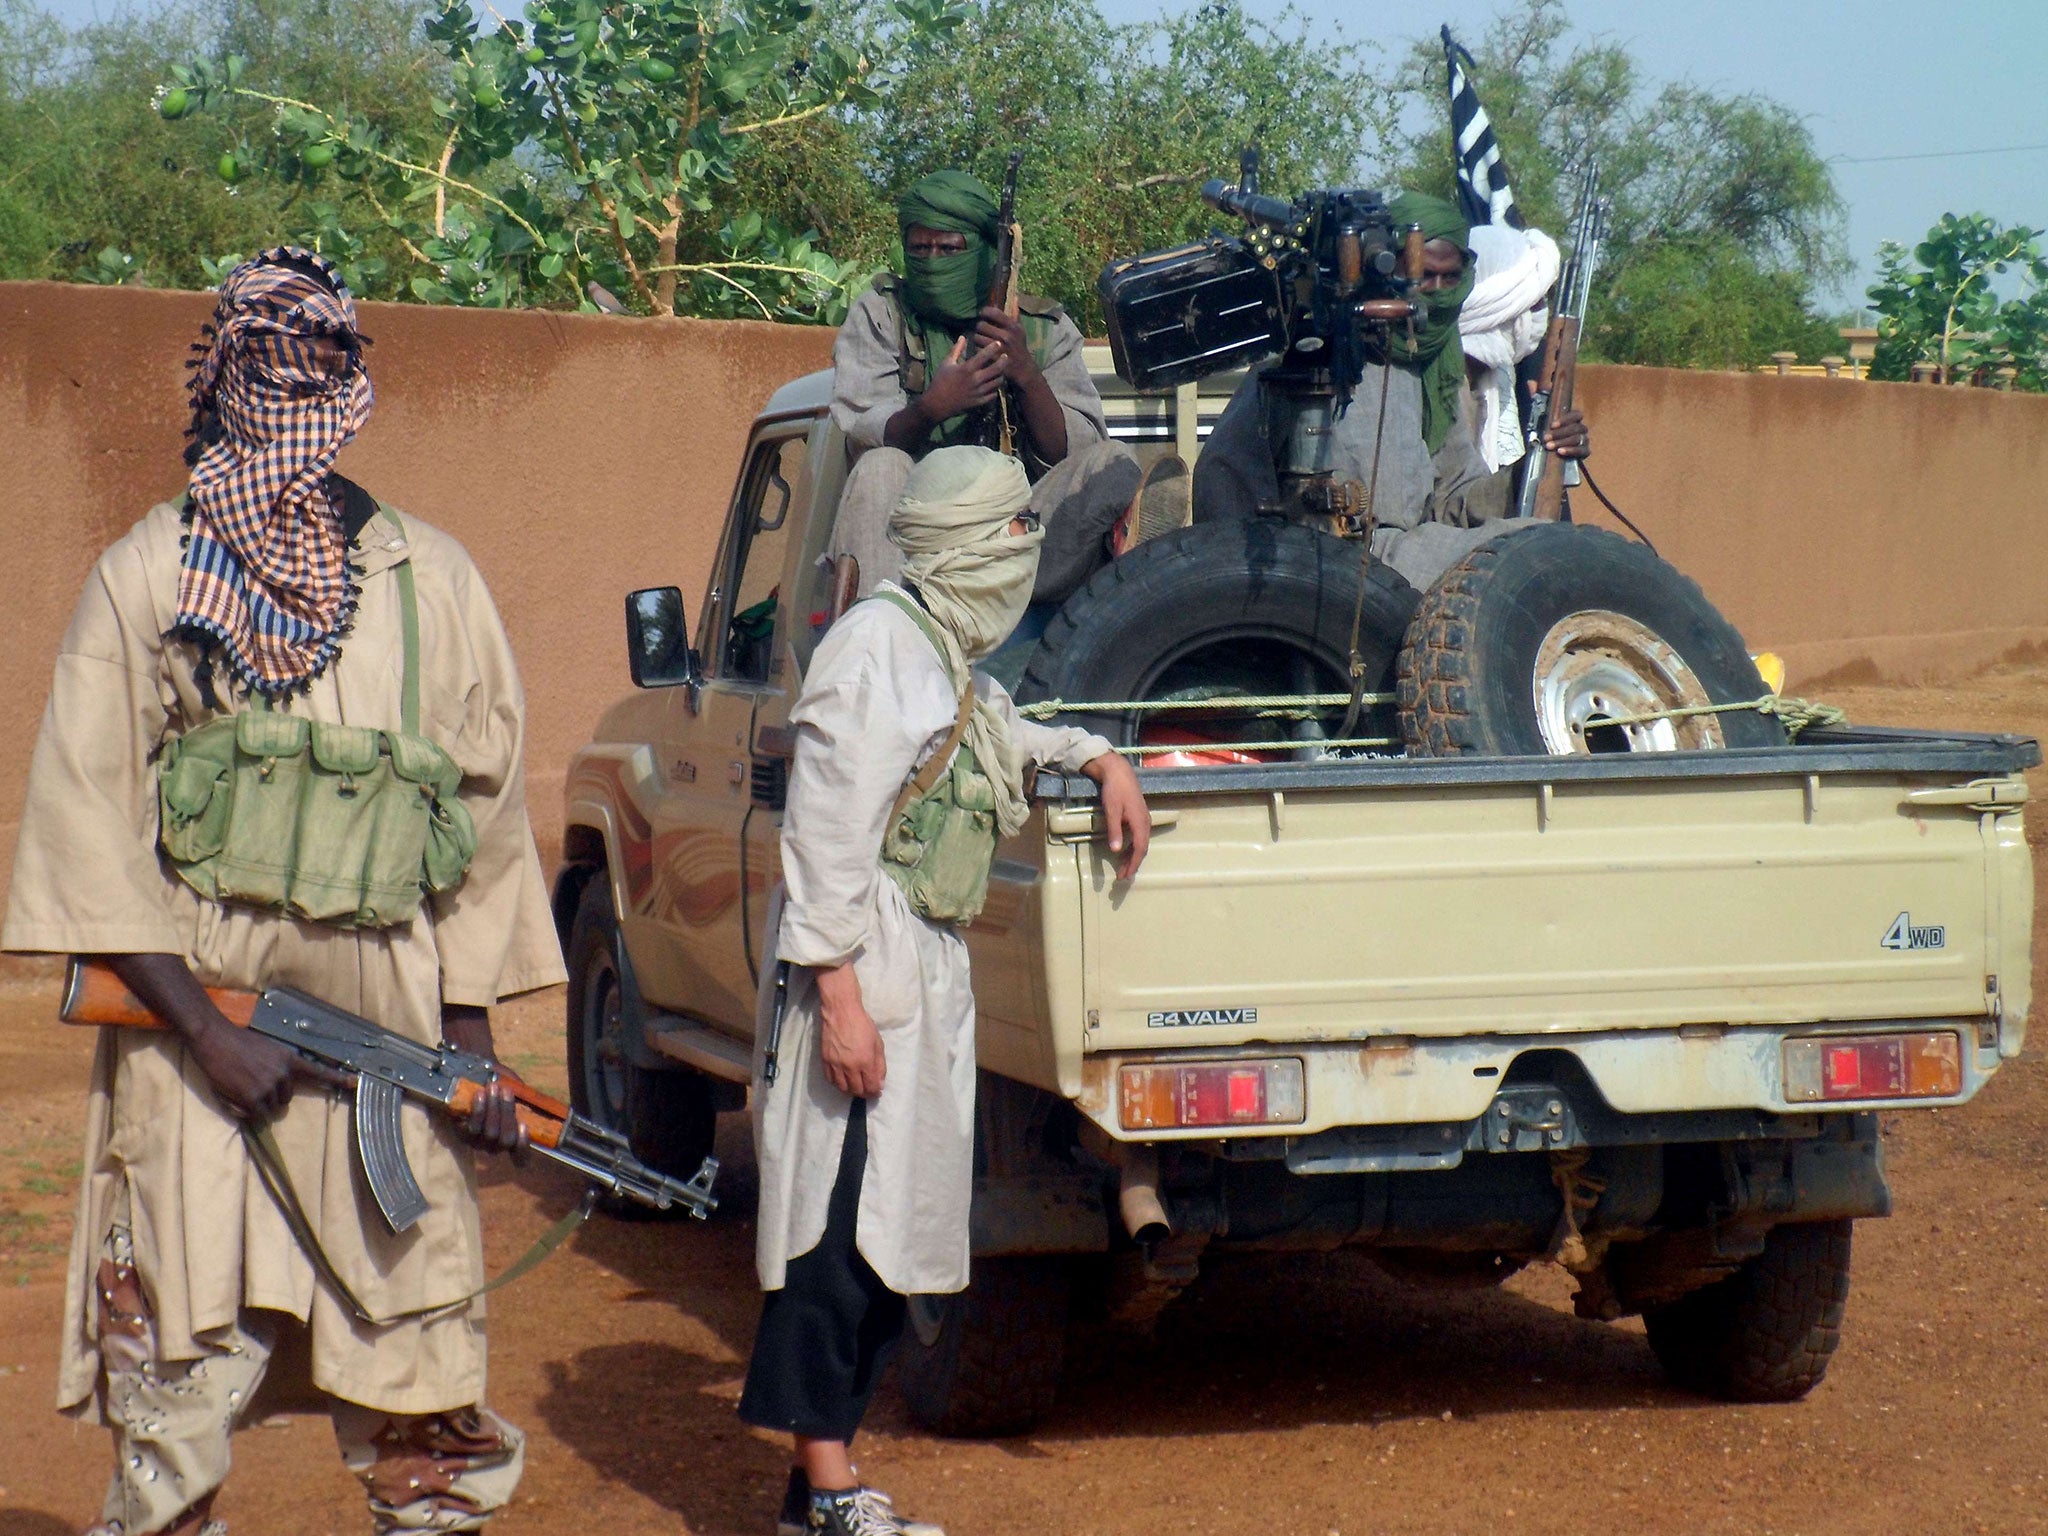 Al-Qaeda linked groups like Ansar Dine are gathering strength four years after a French intervention to push them back